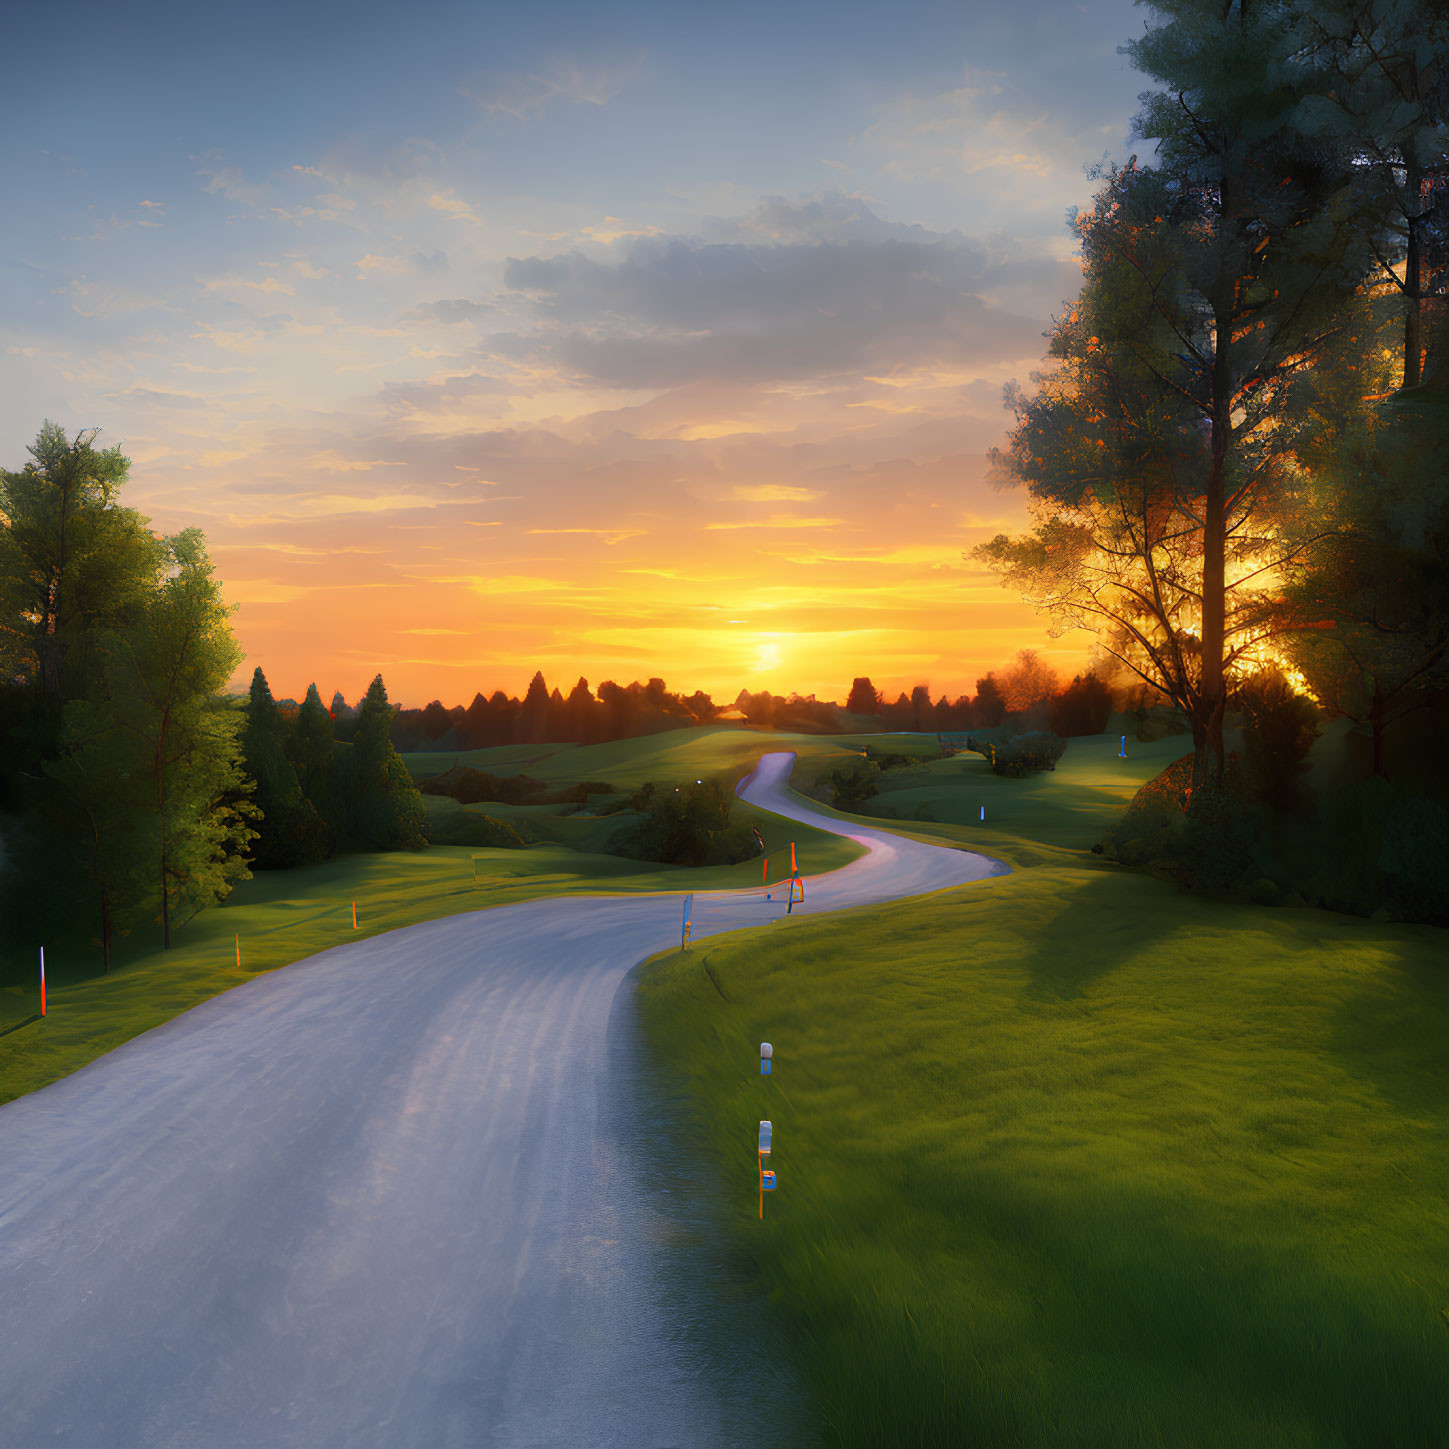 Scenic sunset golf course with winding path, green grass, trees